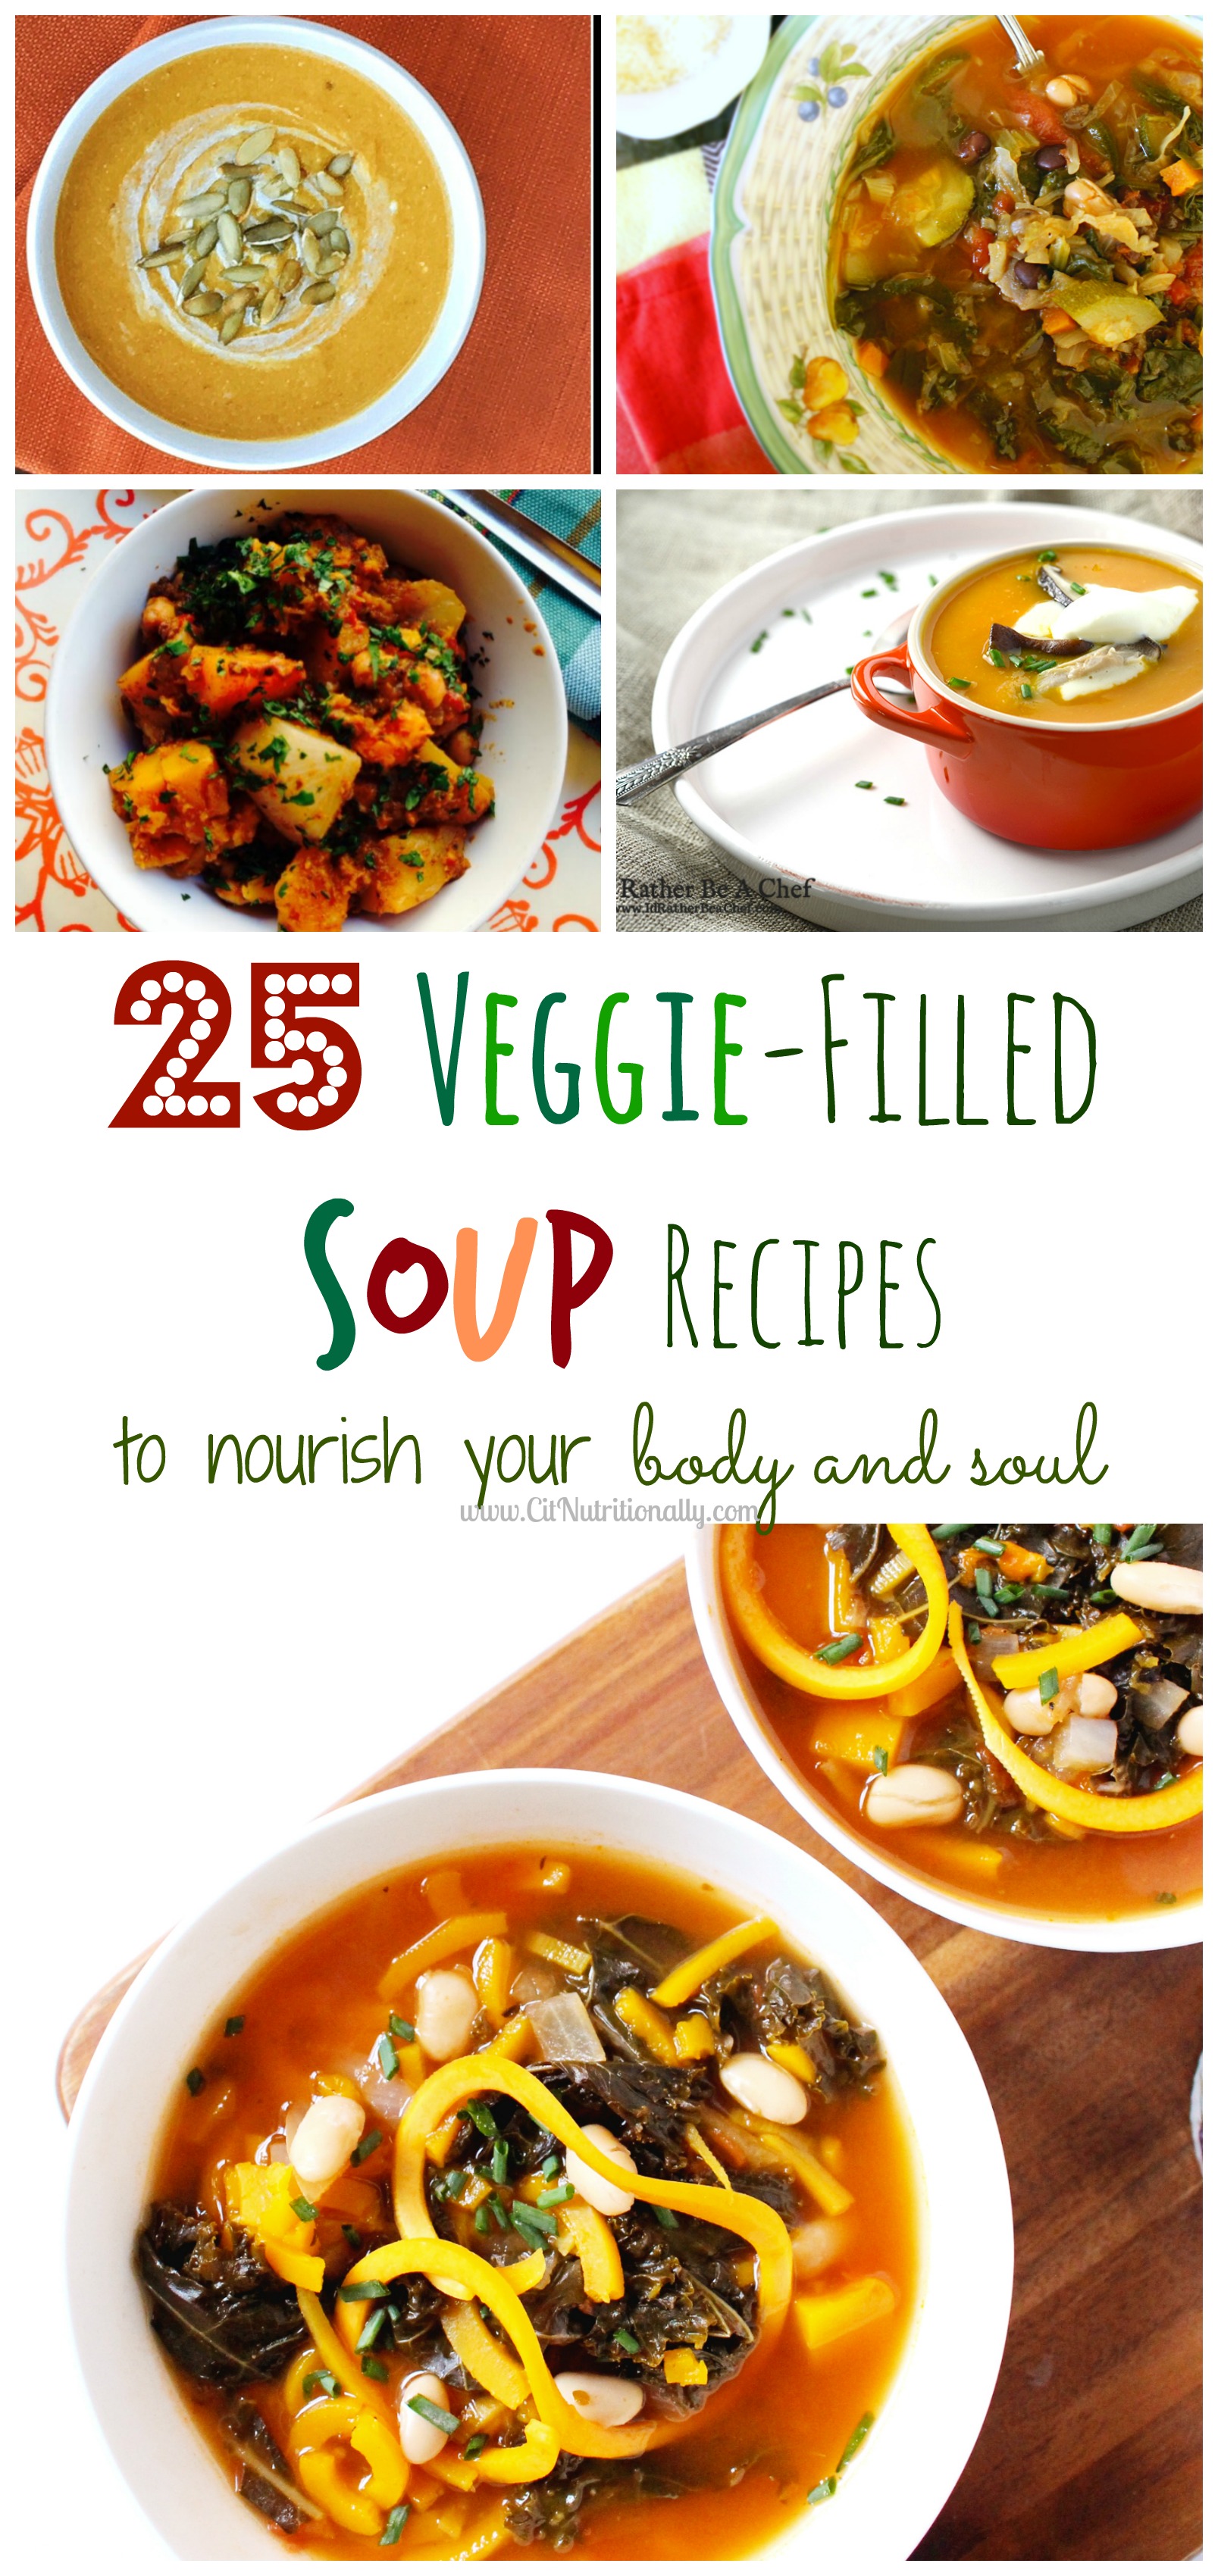 25 Veggie-Filled Soup Recipes to Nourish Your Body and Soul | C it Nutritionally